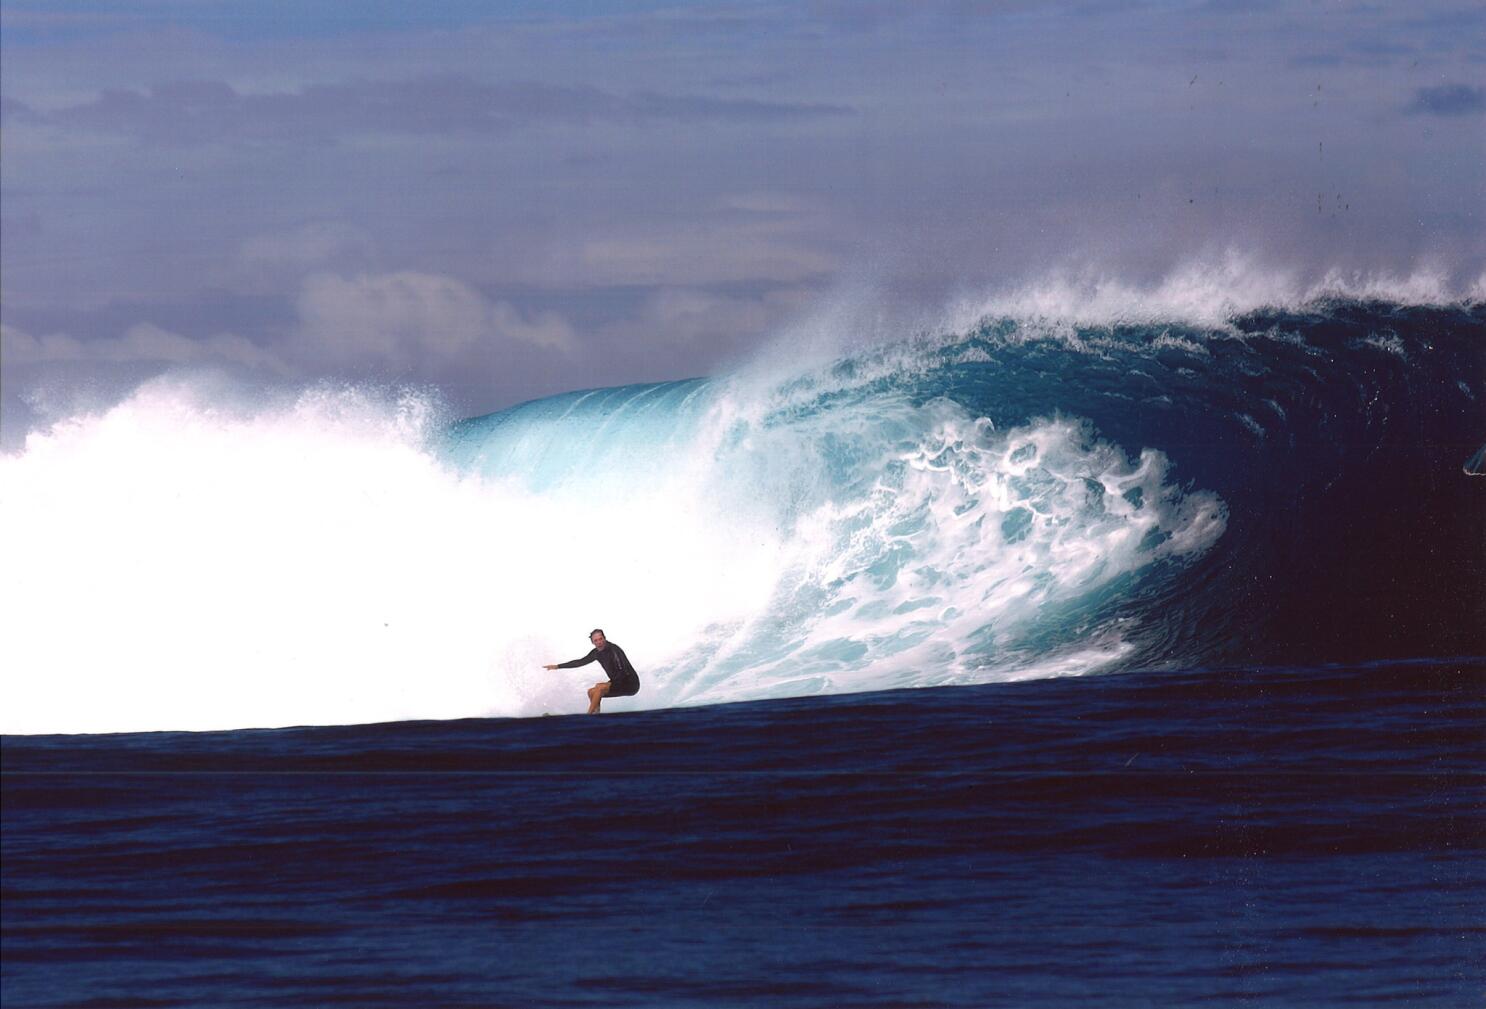 Barbarian Days: A Surfing Life by William Finnegan review – a